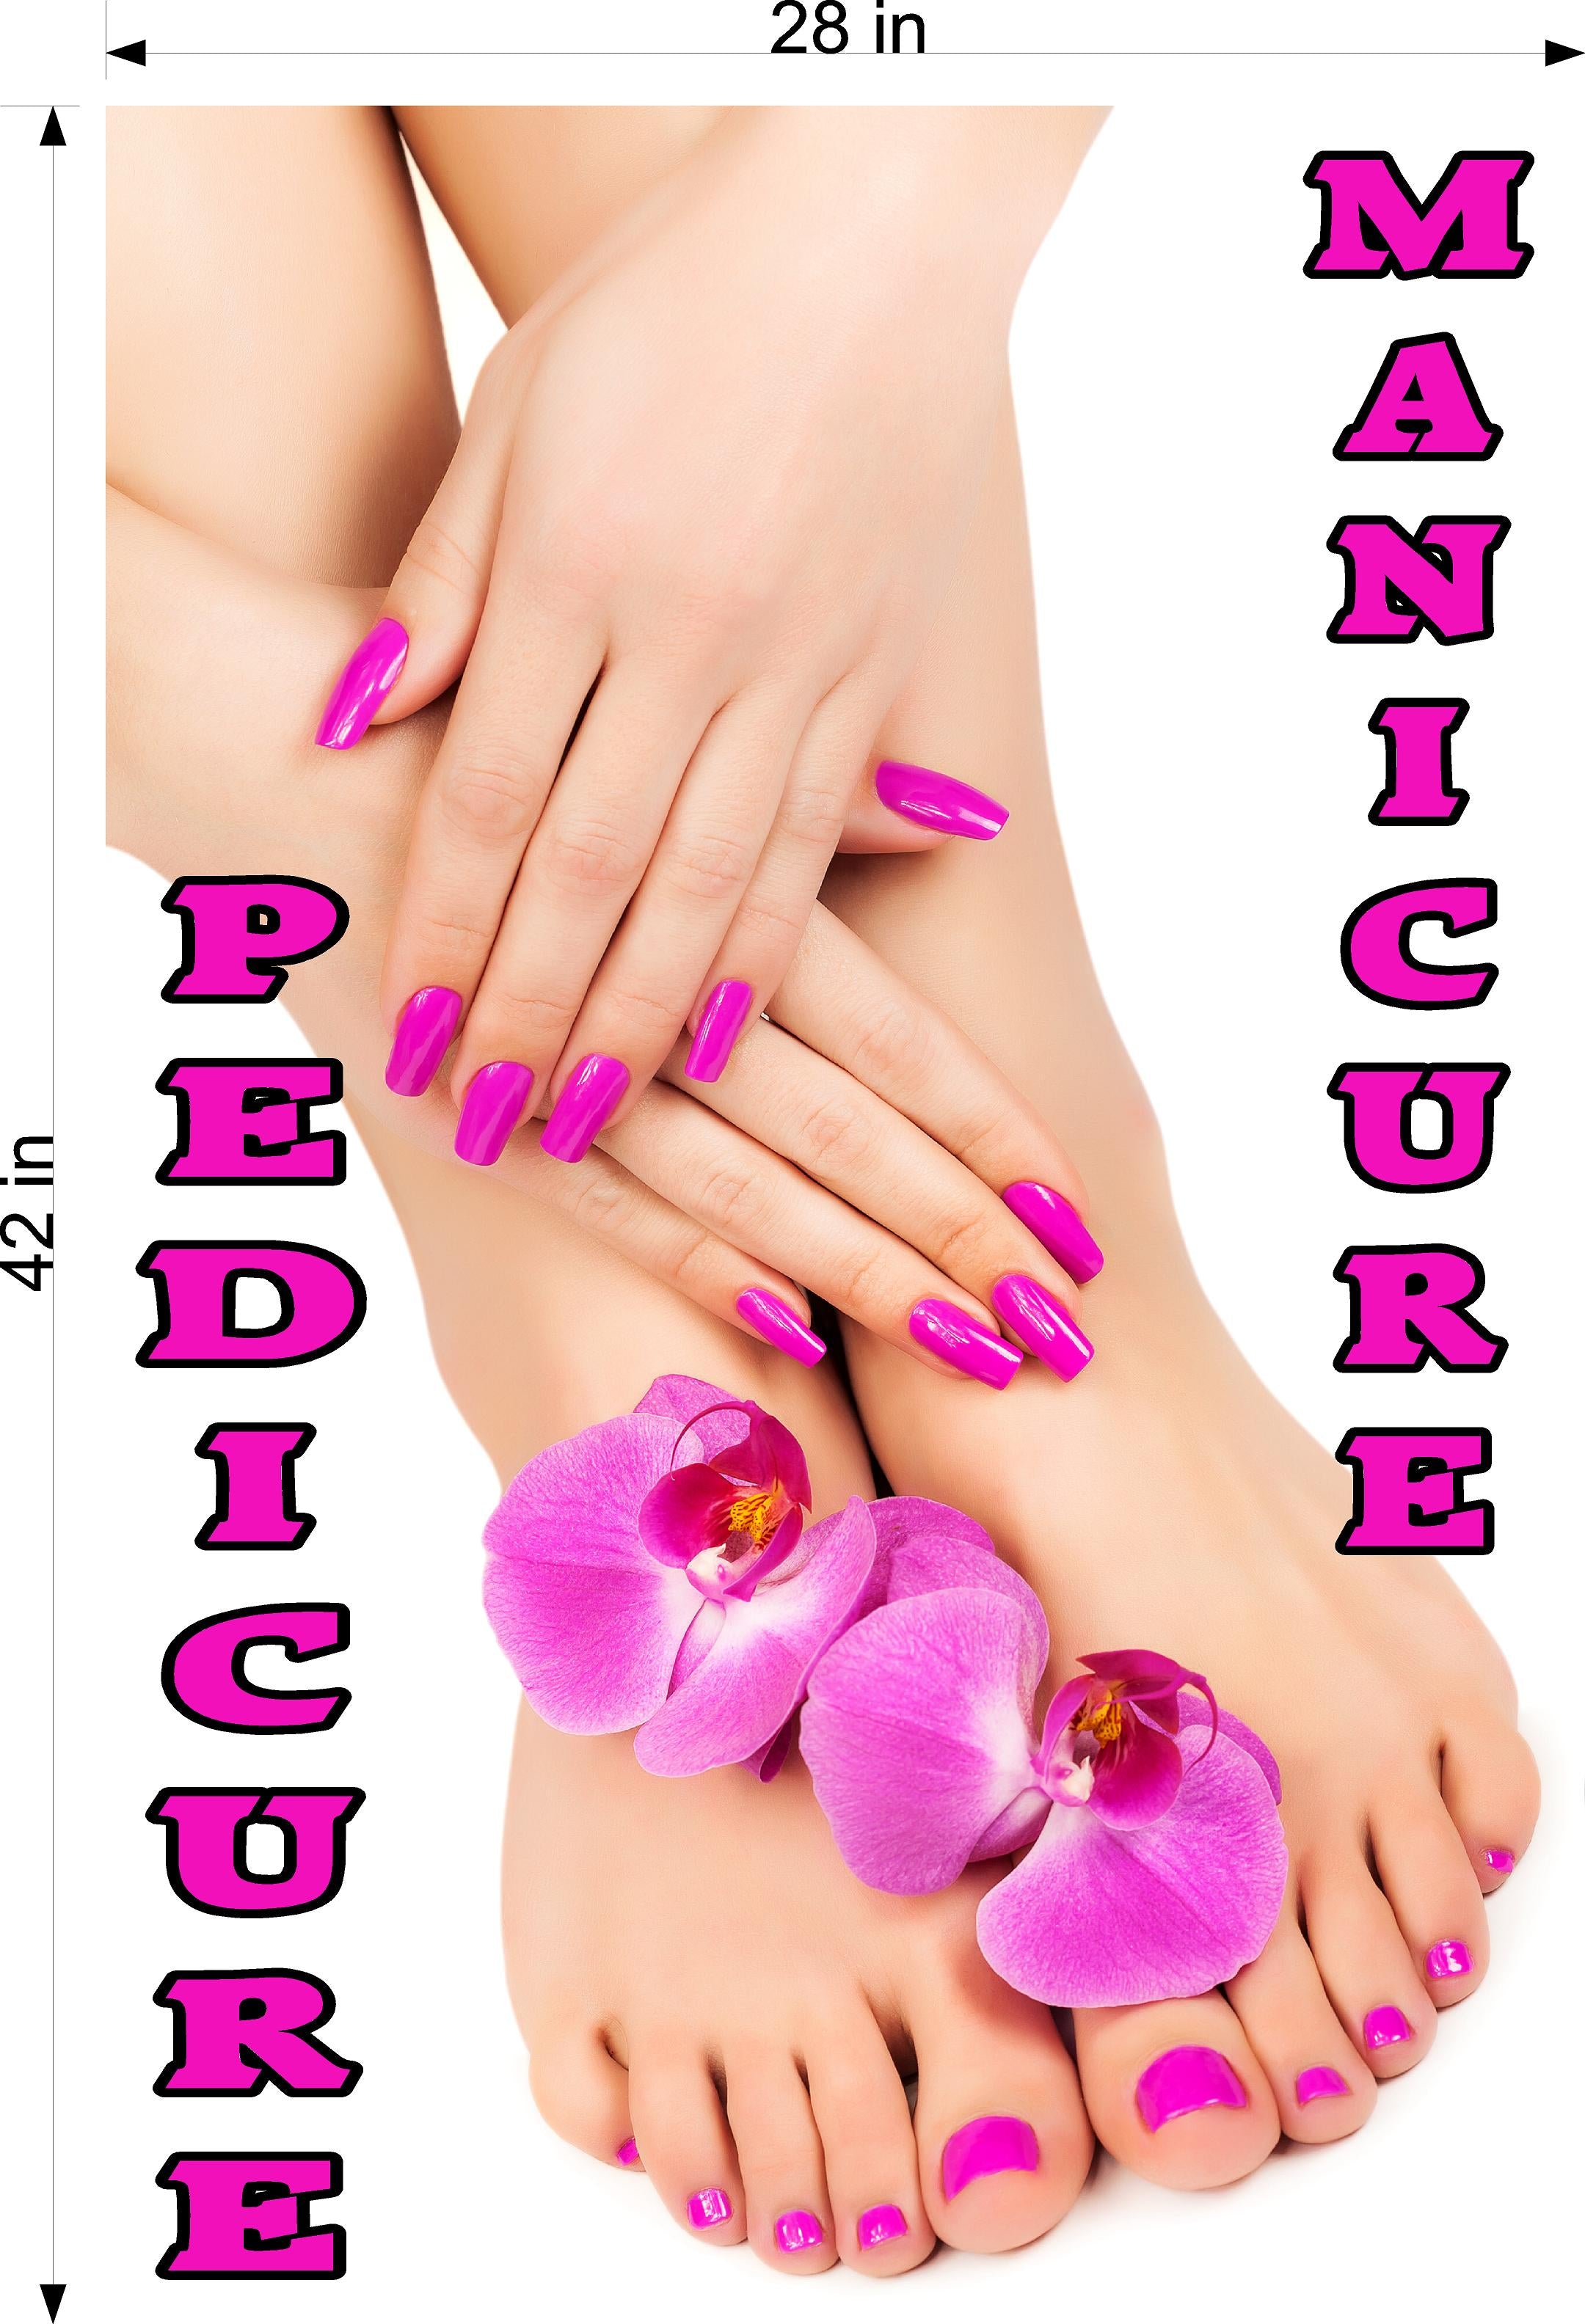 Pedicure & Manicure 09 Wallpaper Poster Decal with Adhesive Backing Wall Sticker Decor Indoors Interior Sign Vertical